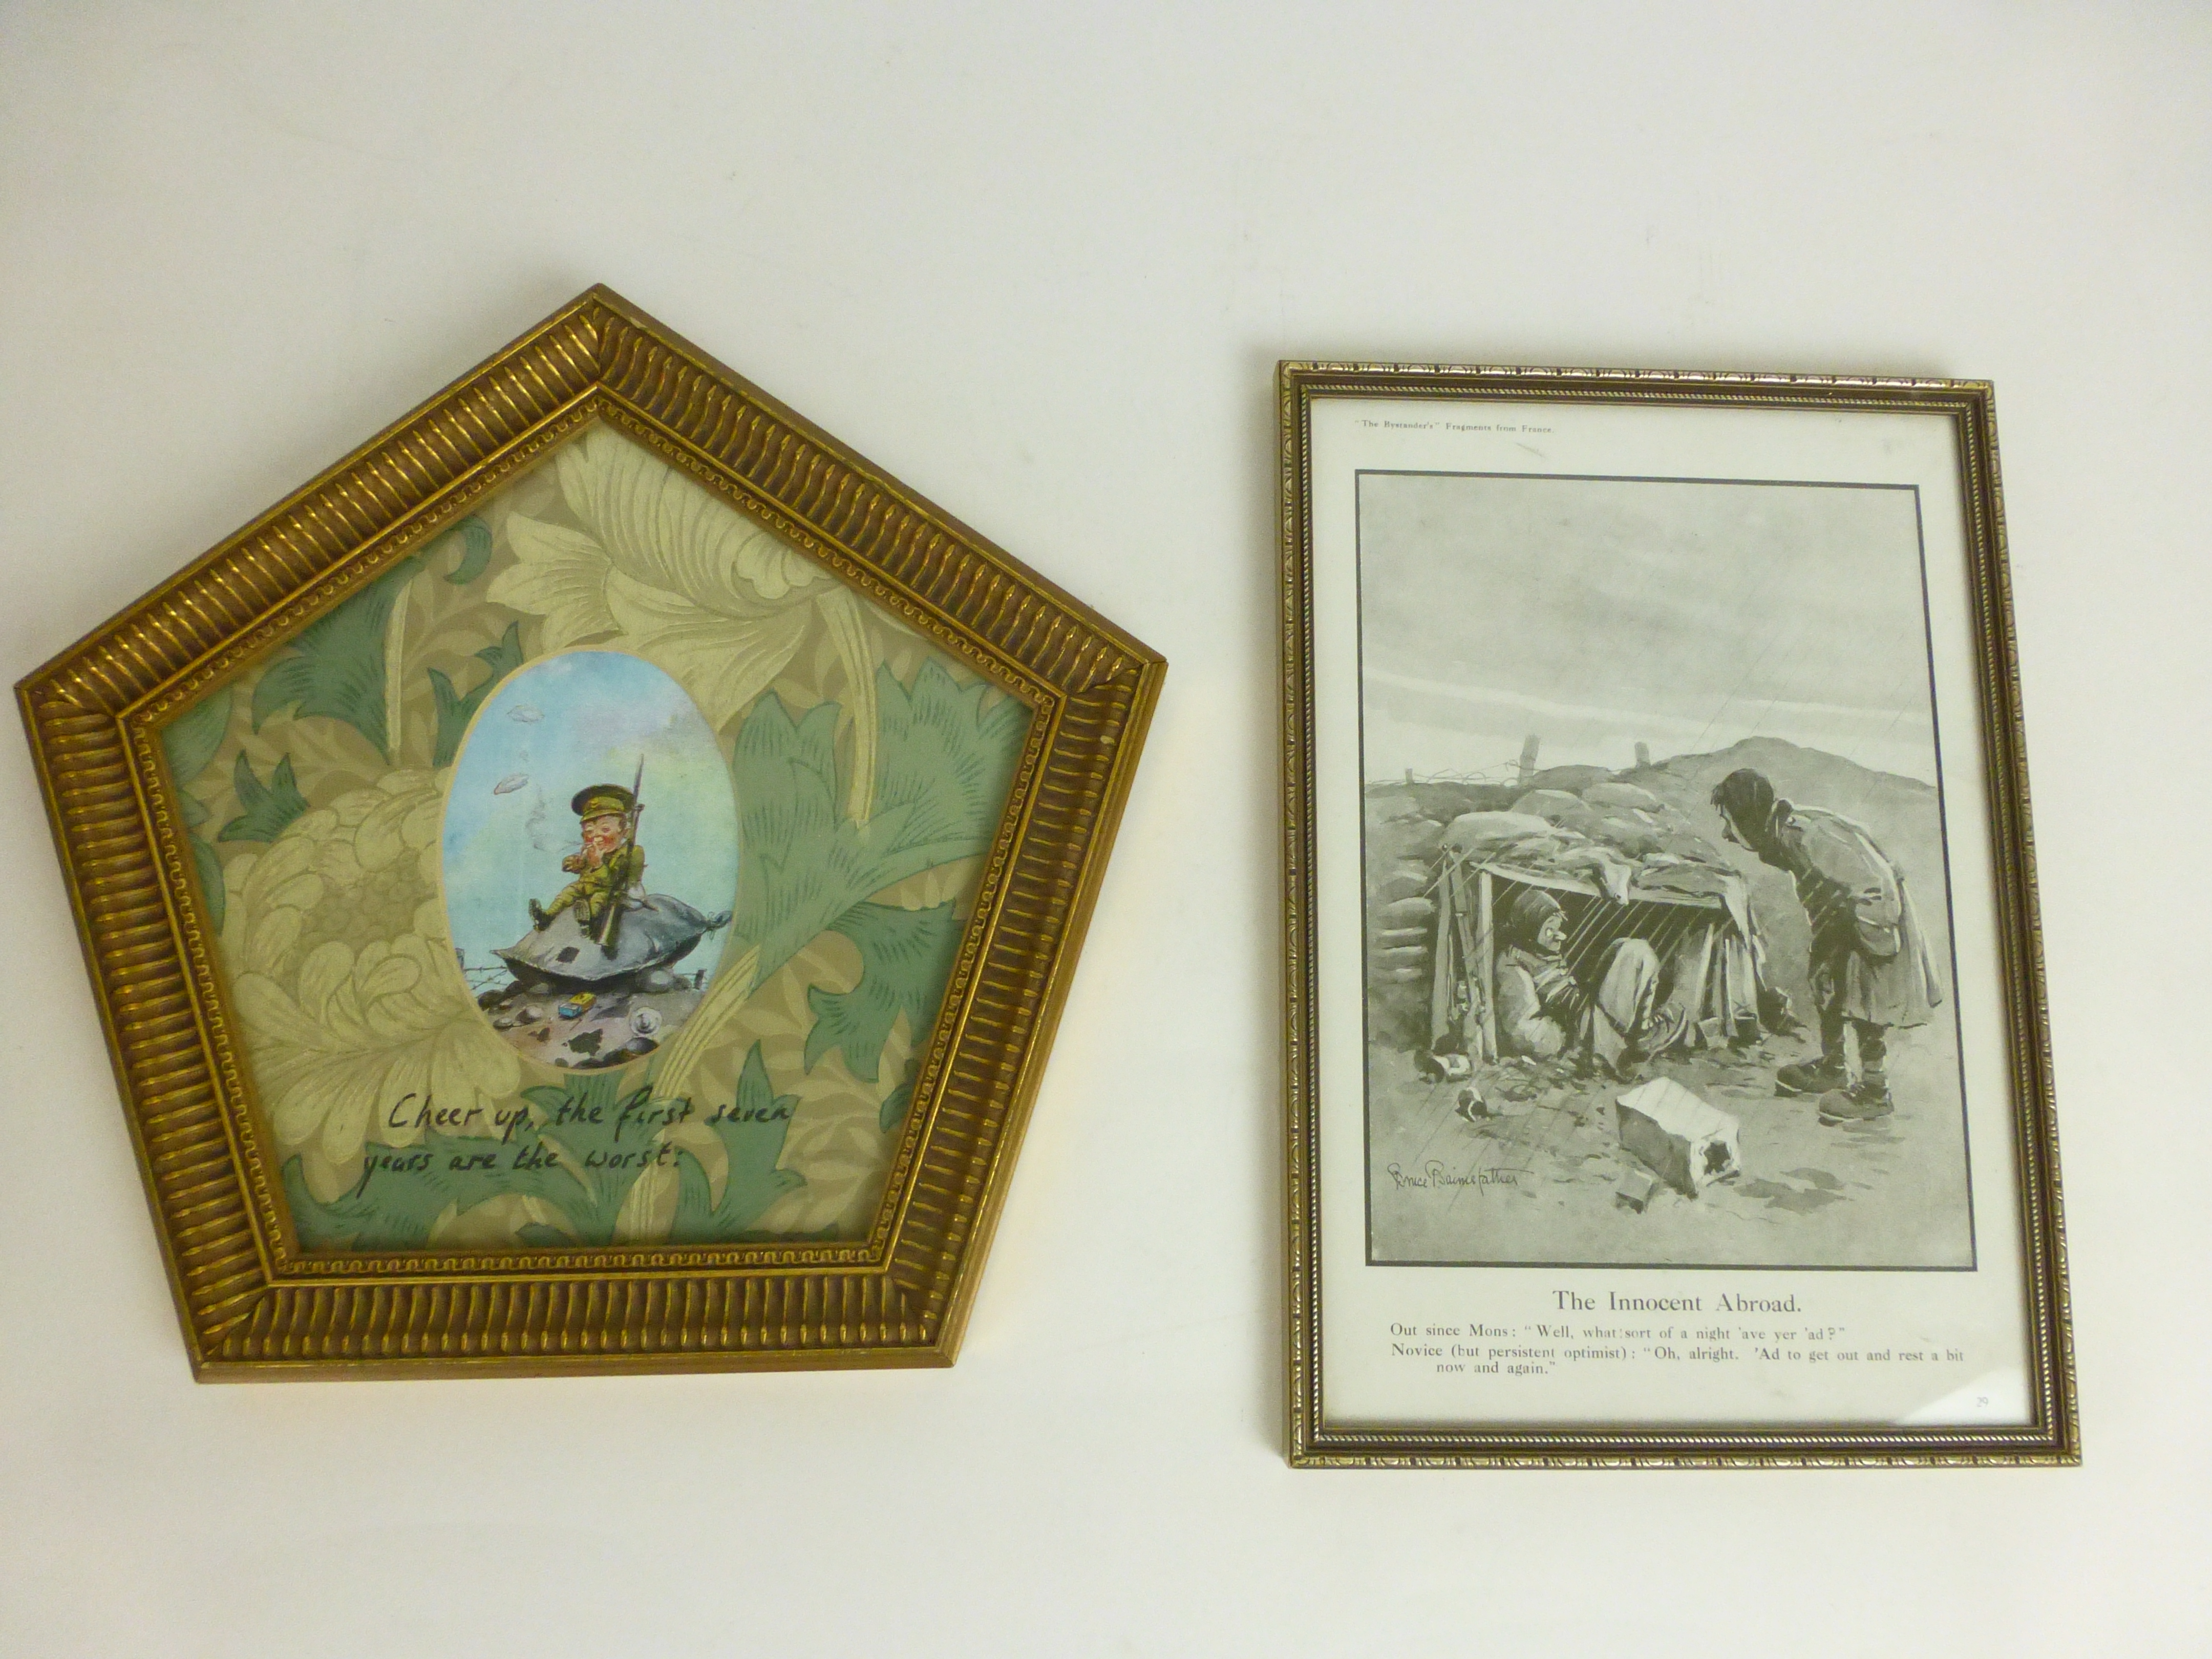 A framed and glazed Bruce Bairnsfather print titled 'The Innocent Abroad' together with another